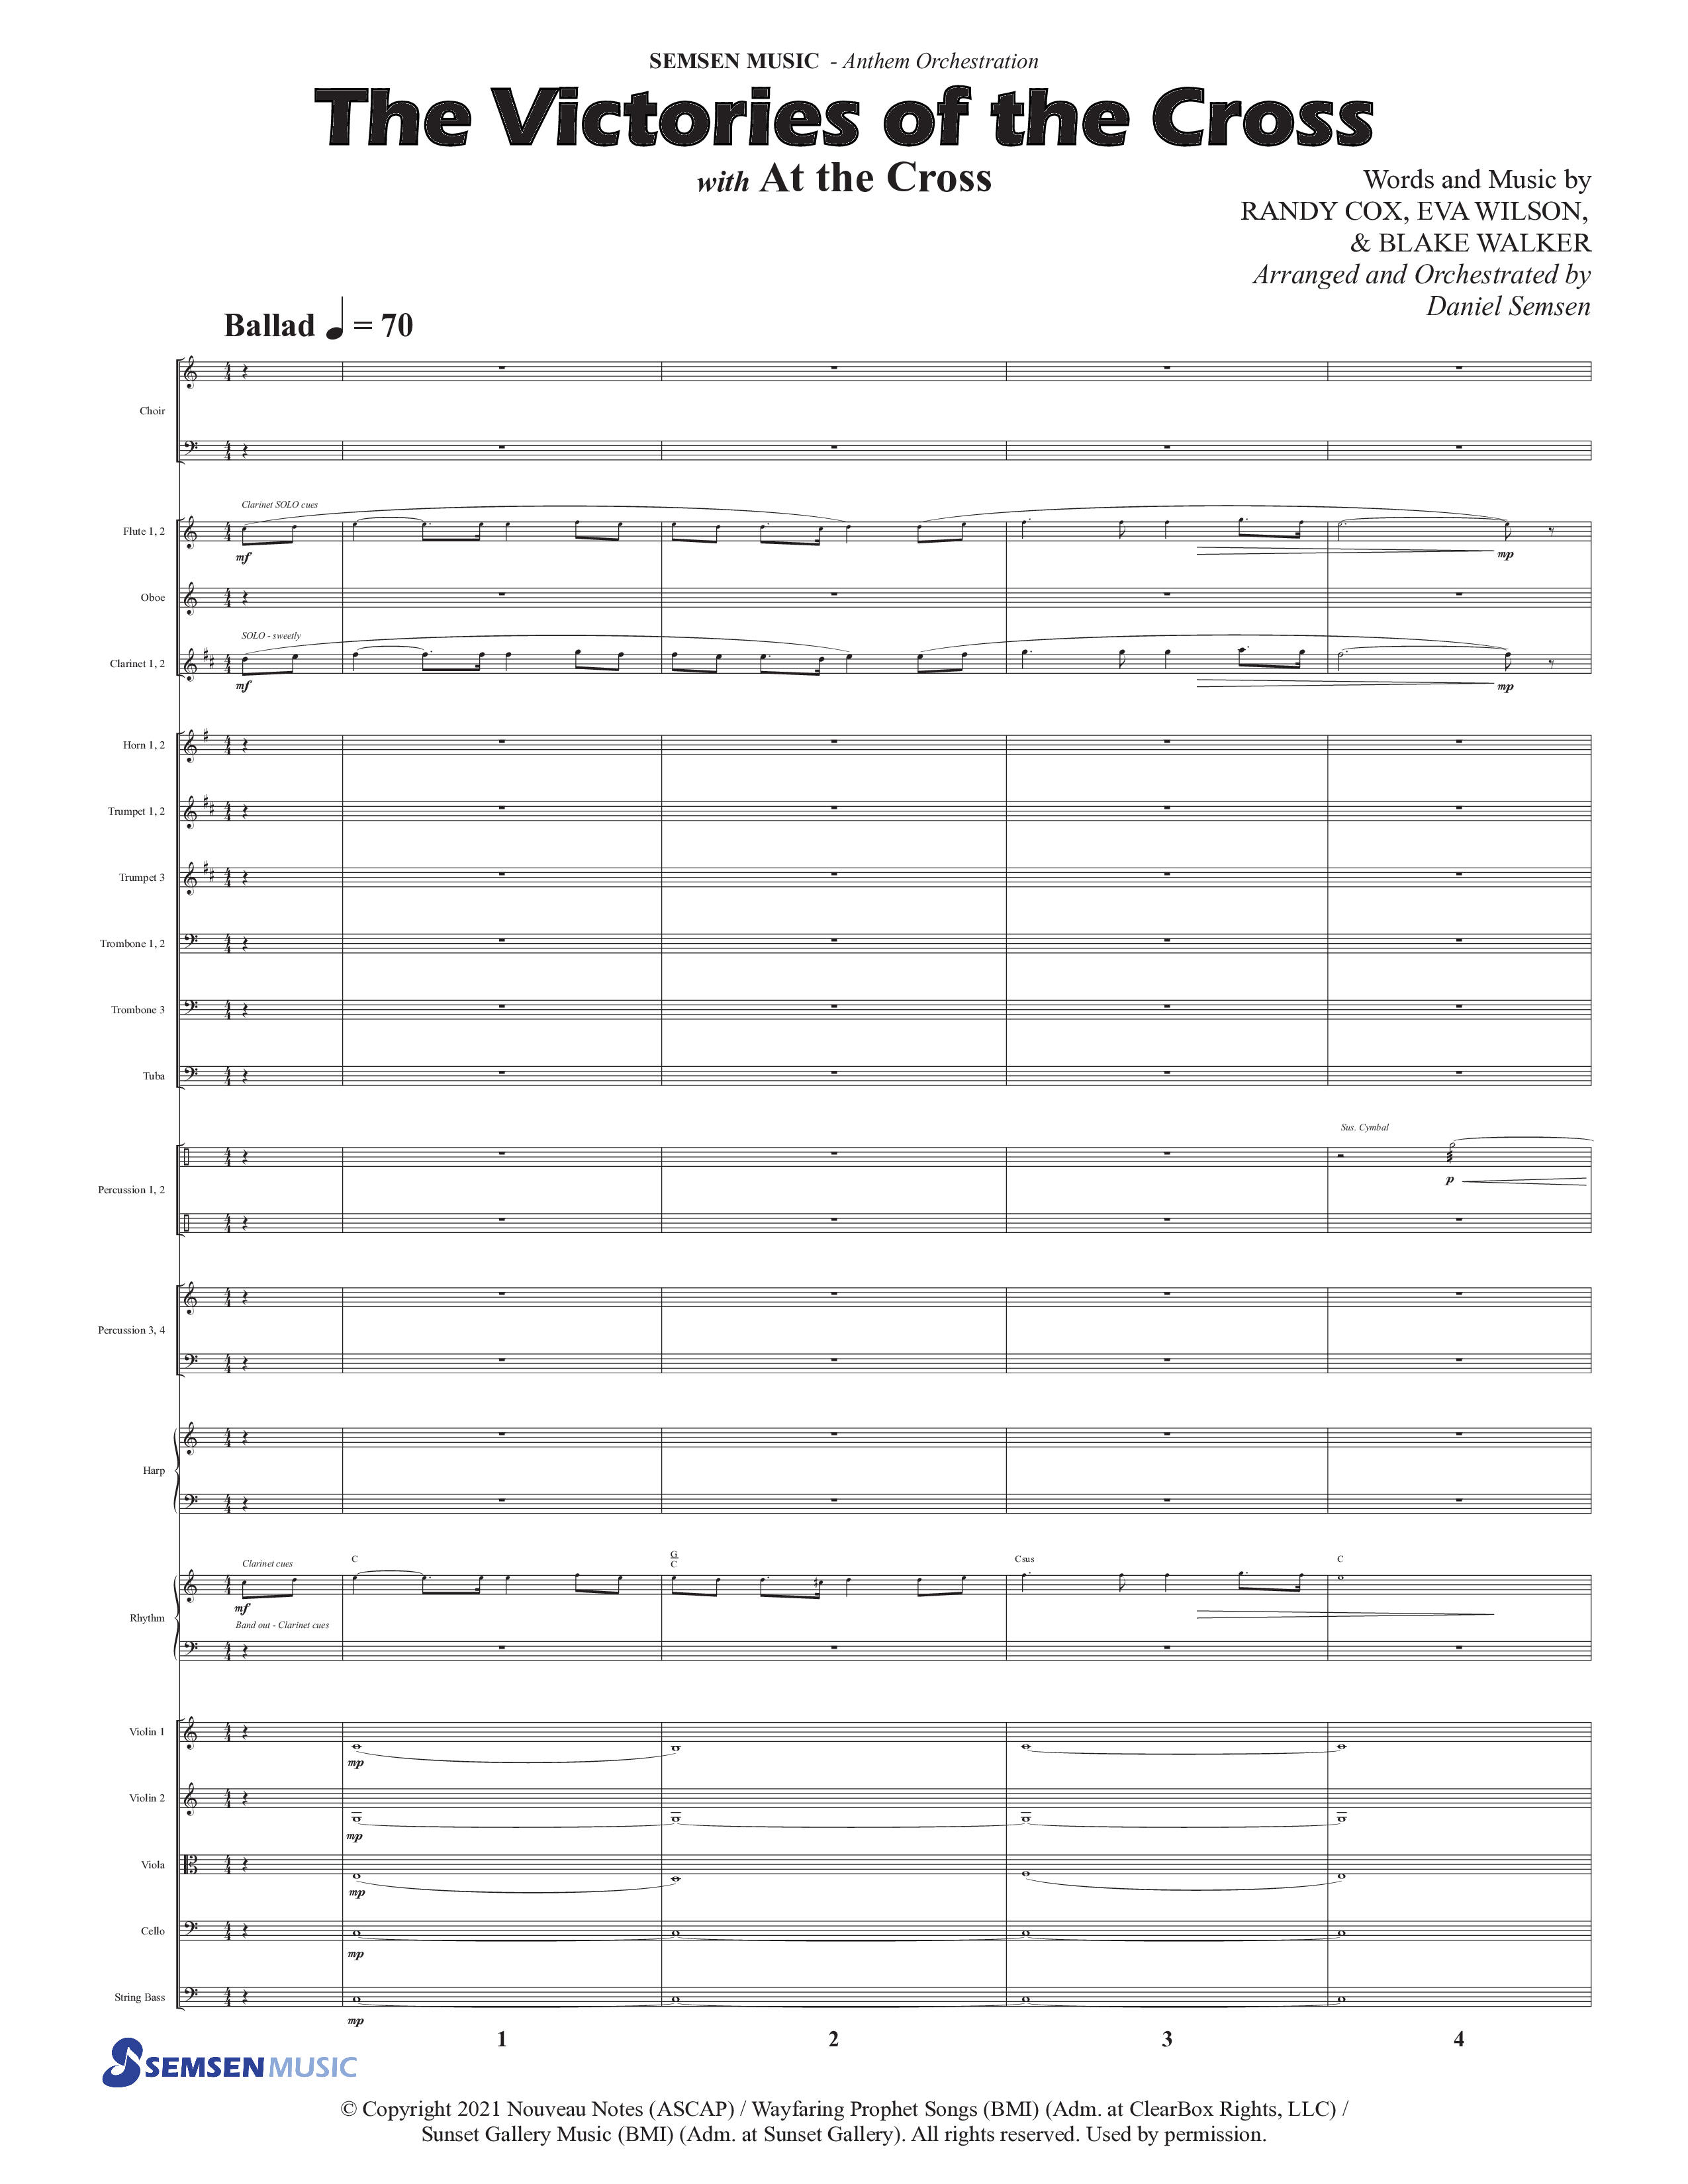 The Victories Of The Cross (with At The Cross) (Choral Anthem SATB) Conductor's Score (Semsen Music / Arr. Daniel Semsen)